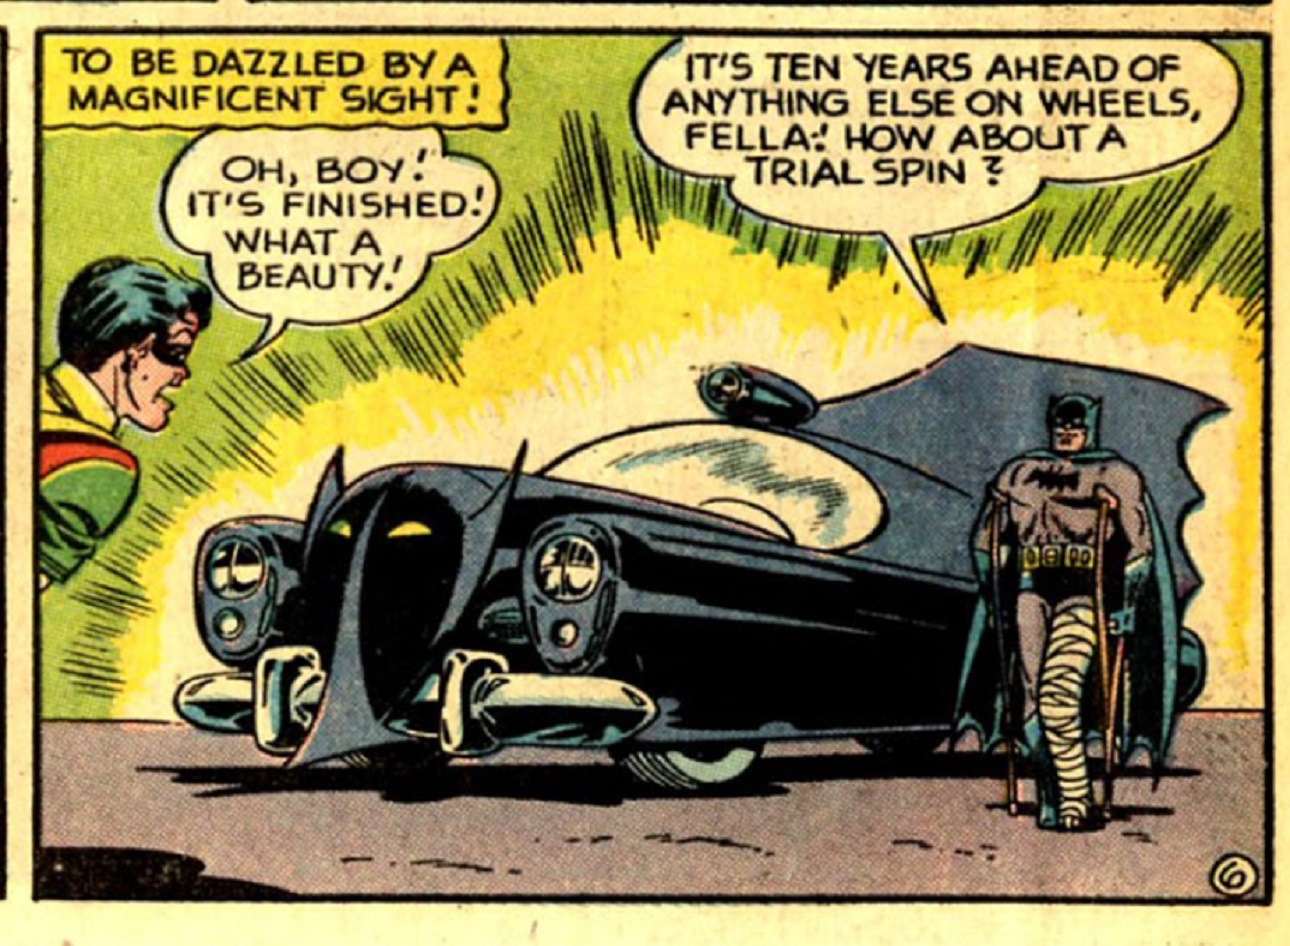 1950 batmobile comics - To Be Dazzled By A Magnificent Sight! It'S Ten Years Ahead Of Anything Else On Wheels, Fella How About A Trial Spin ? Oh, Boy! It'S Finished! What A Beauty! Name